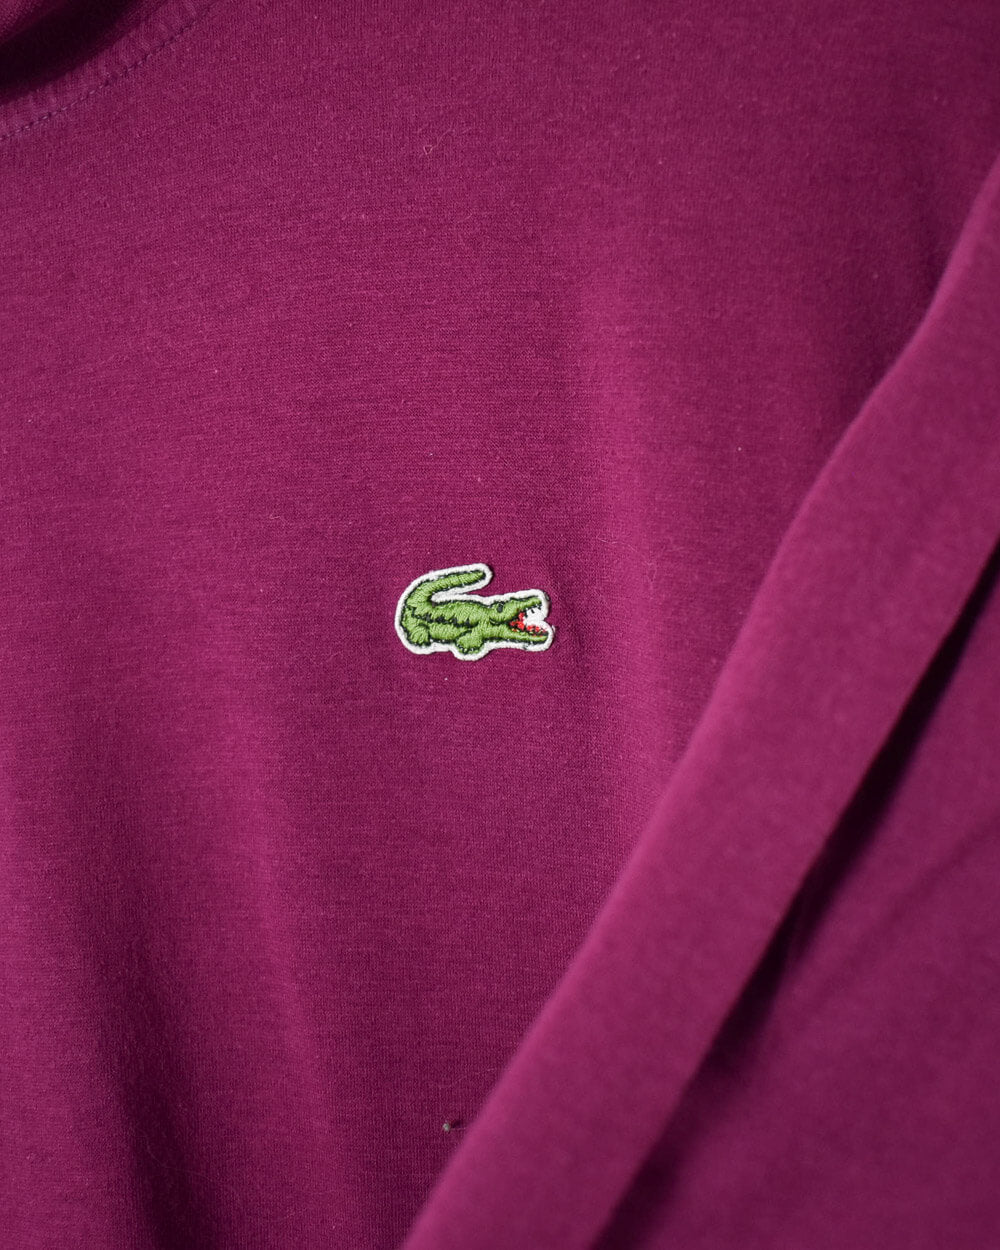 Chemise Lacoste Sweatshirt - Small - Domno Vintage 90s, 80s, 00s Retro and Vintage Clothing 